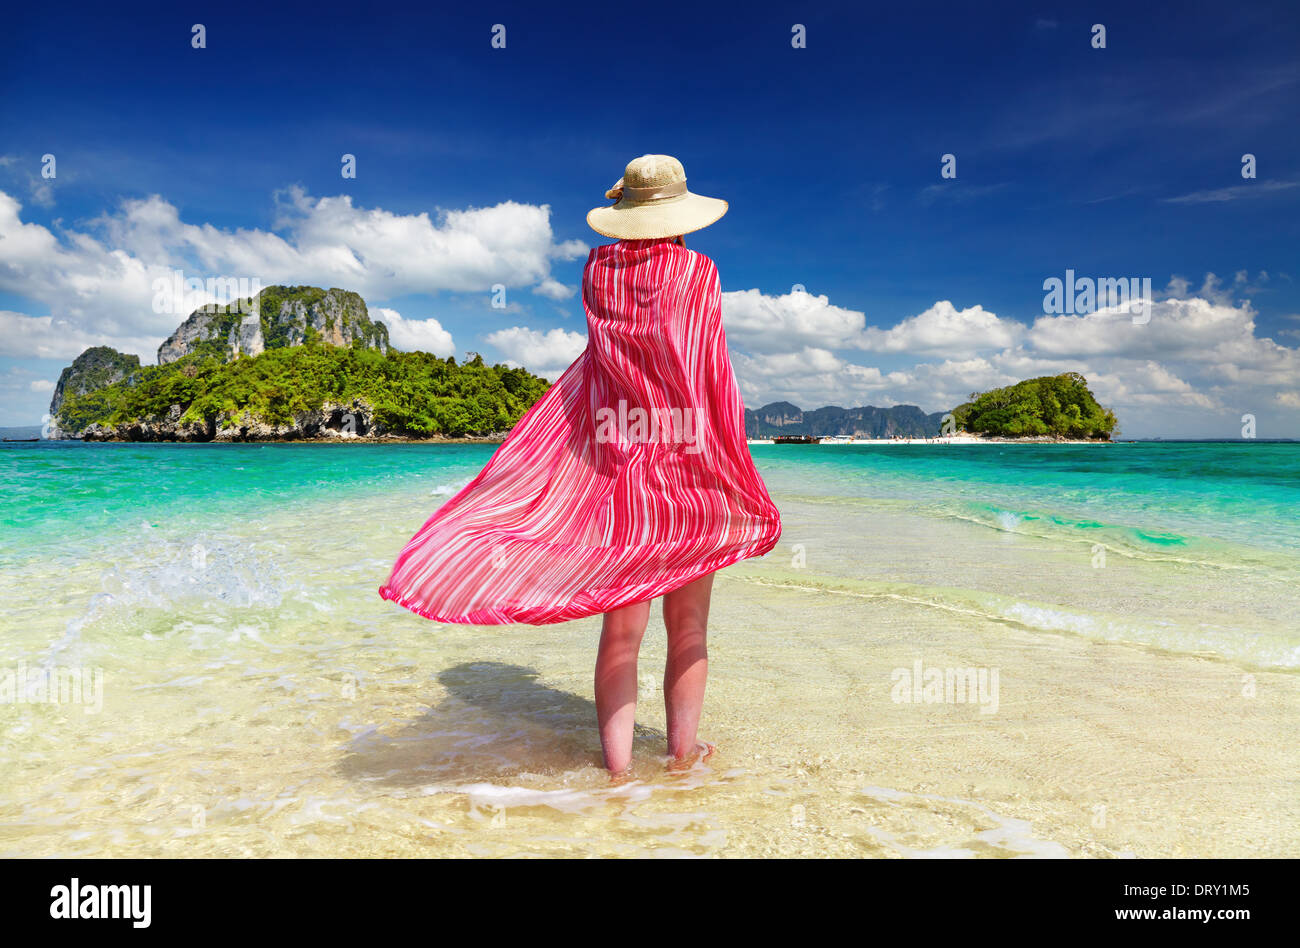 Woman in pink pareo and hat at the beach, Andaman Sea, Thailand Stock Photo